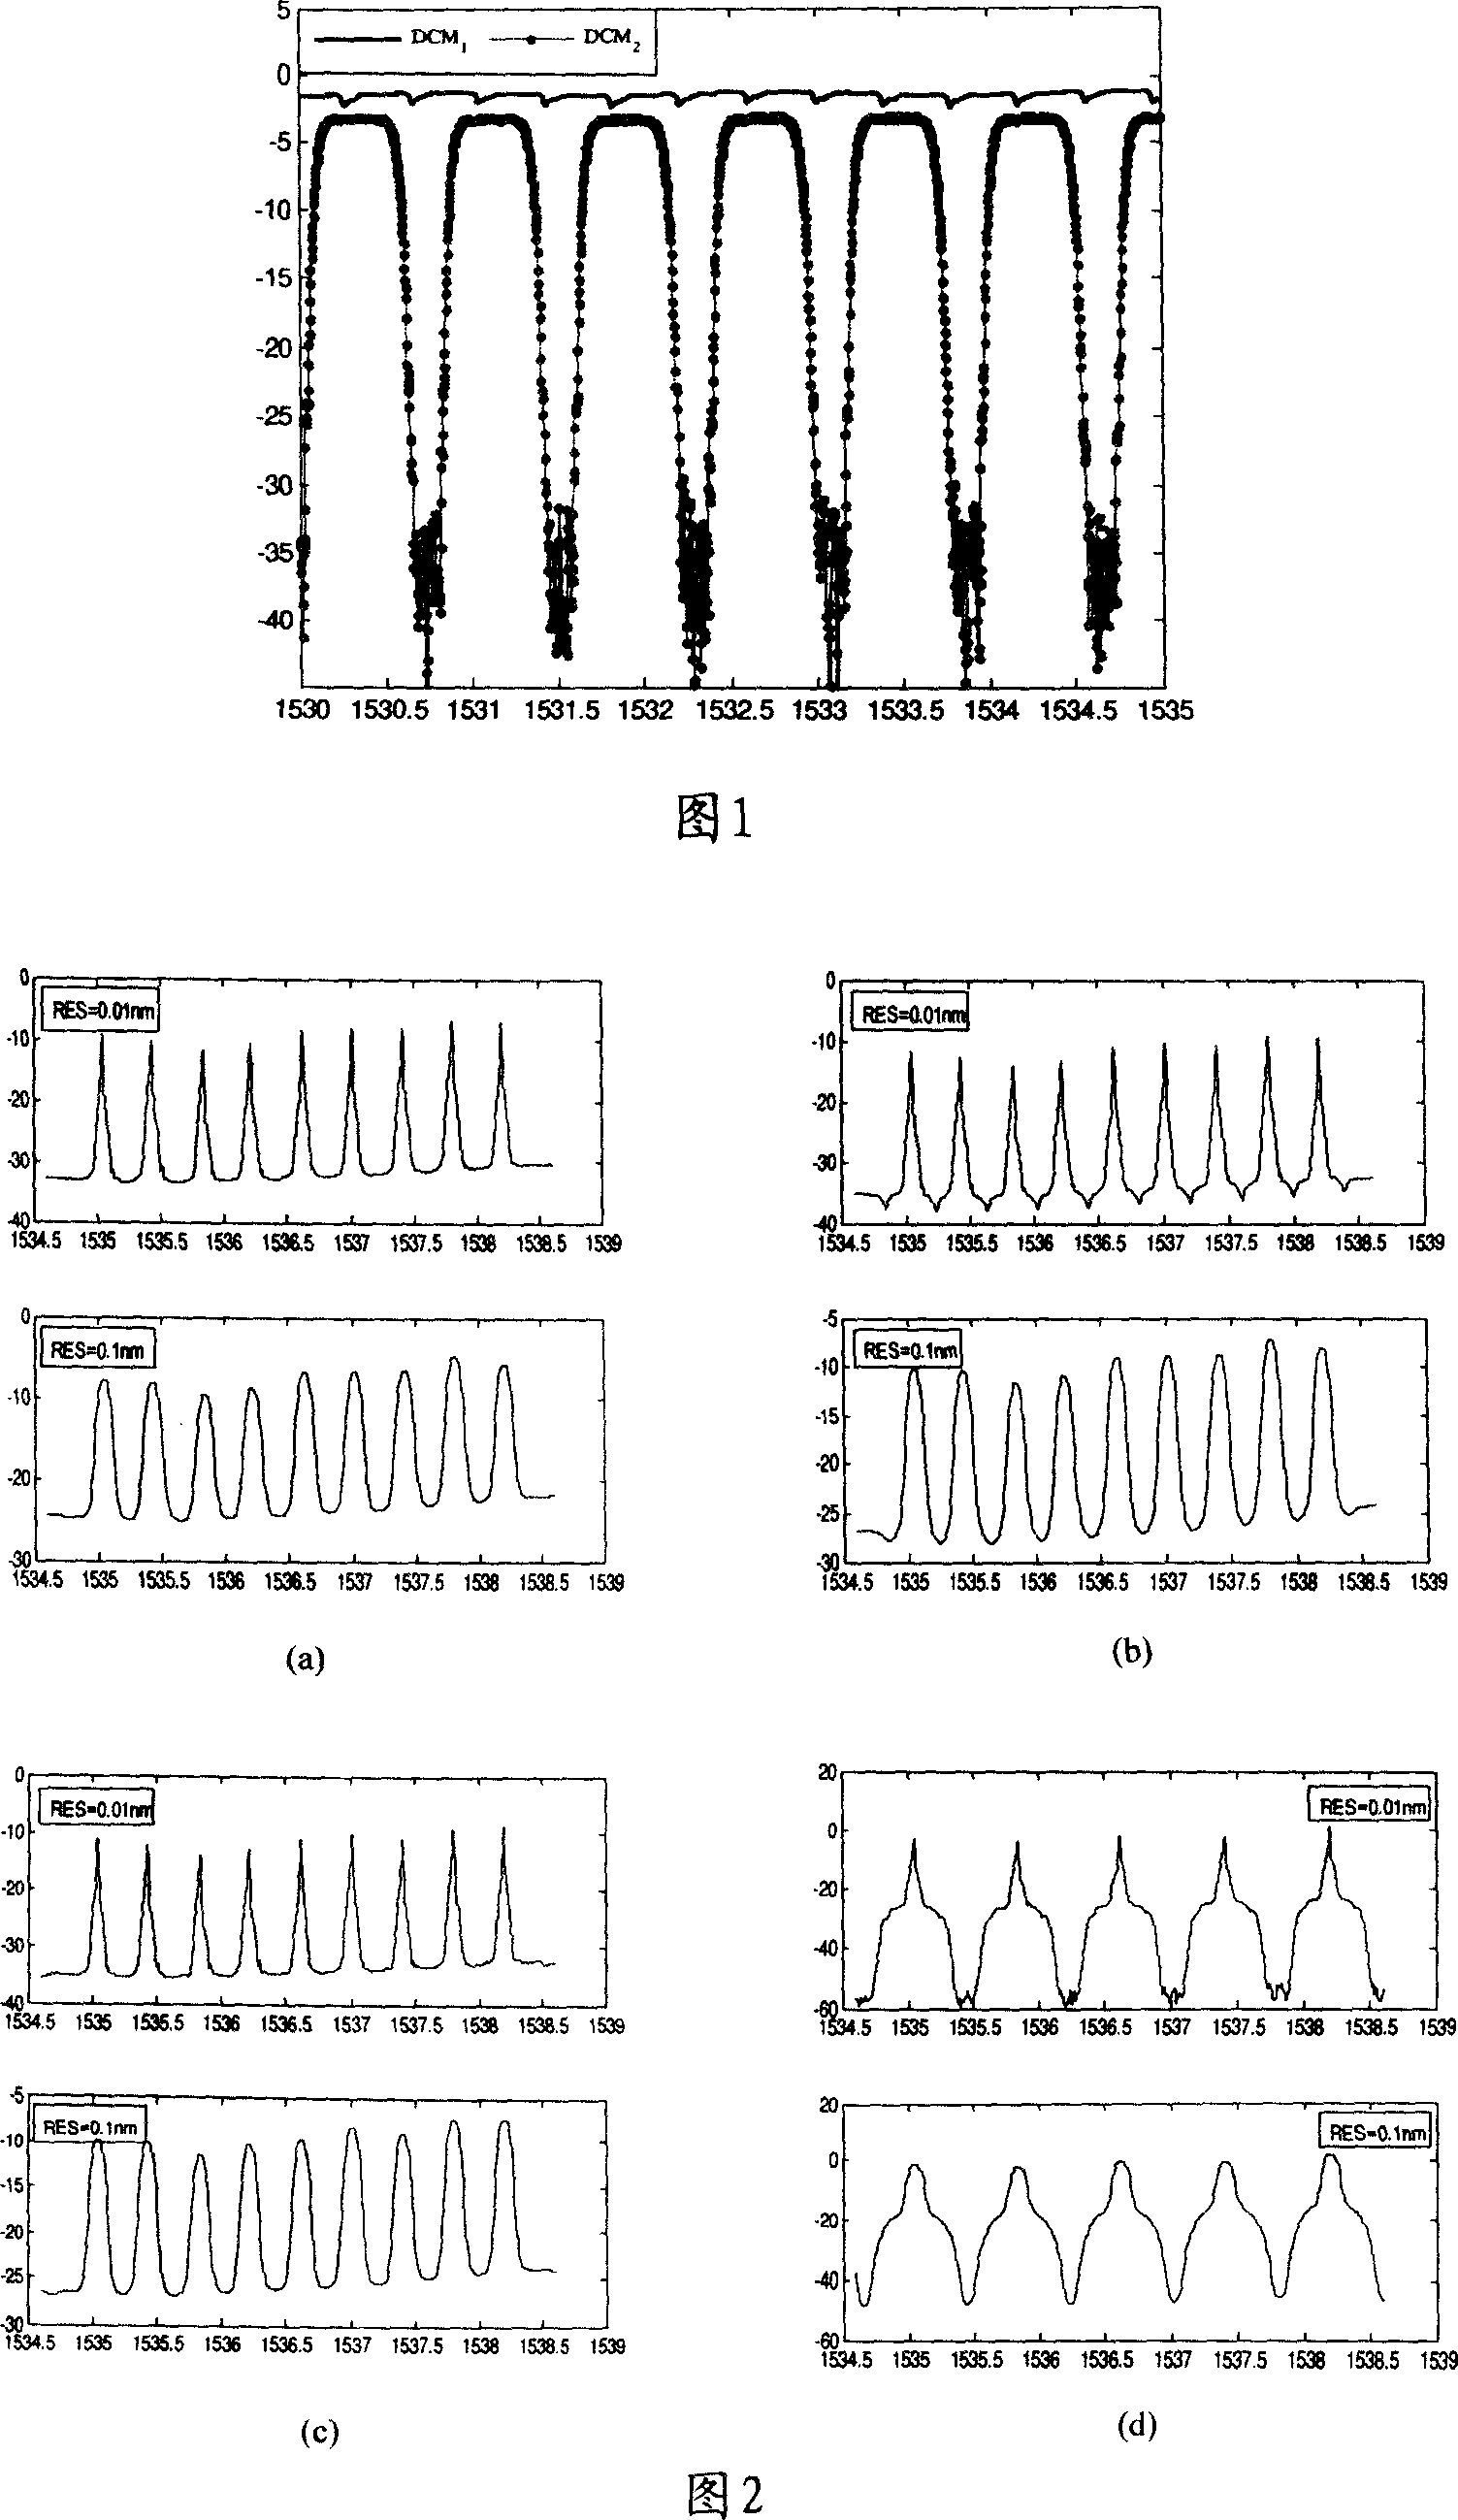 Method for testing signal-to-noise ratio of wavelength division multiplexing system